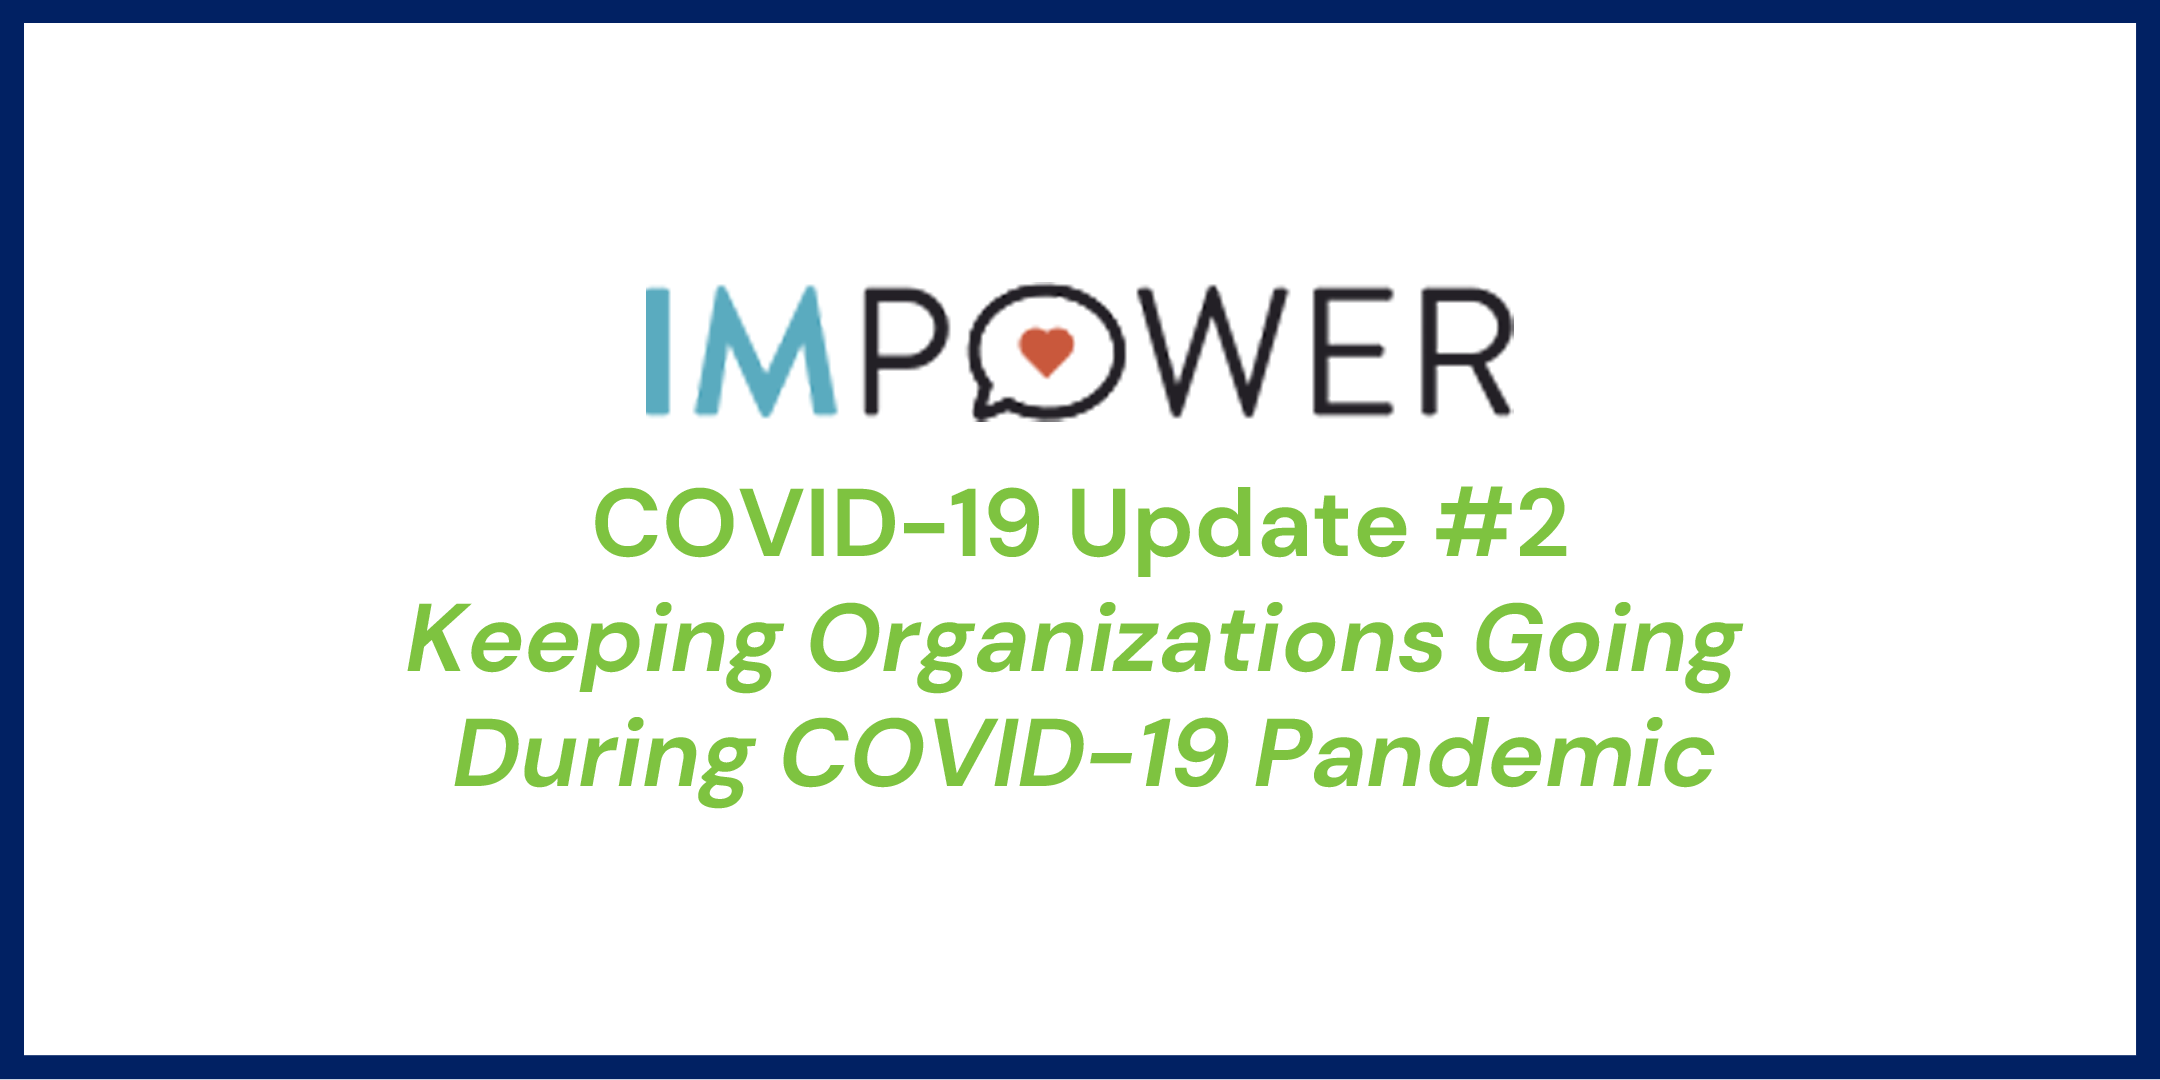 Keeping Organizations Going During COVID-19